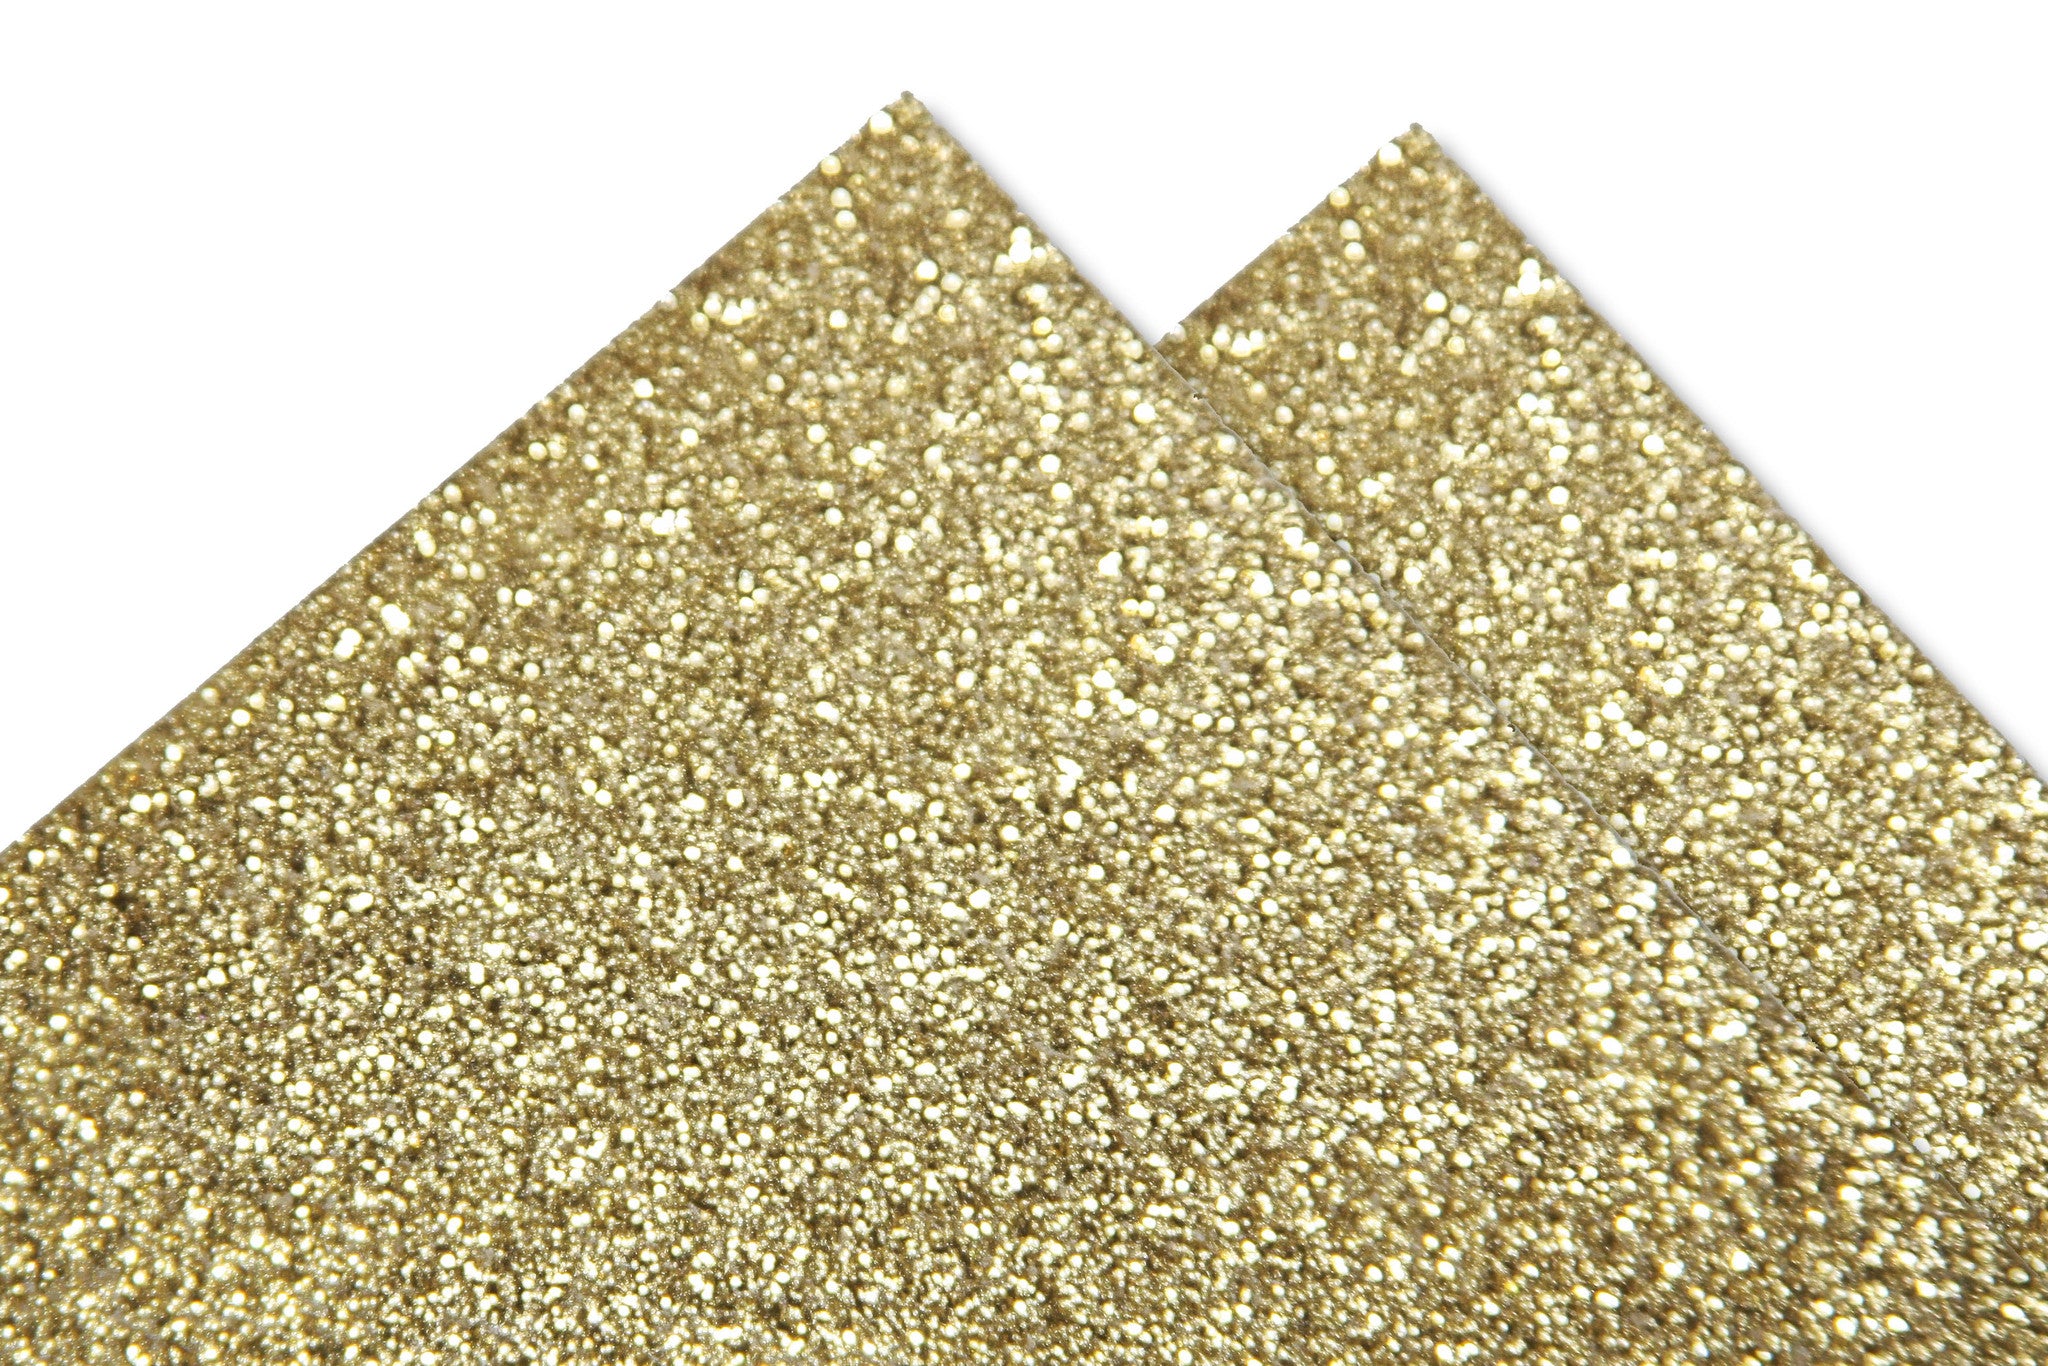 From book covers and cards to banners and wall art, glitter paper is sure  to up the wow-factor on your next paper projec…